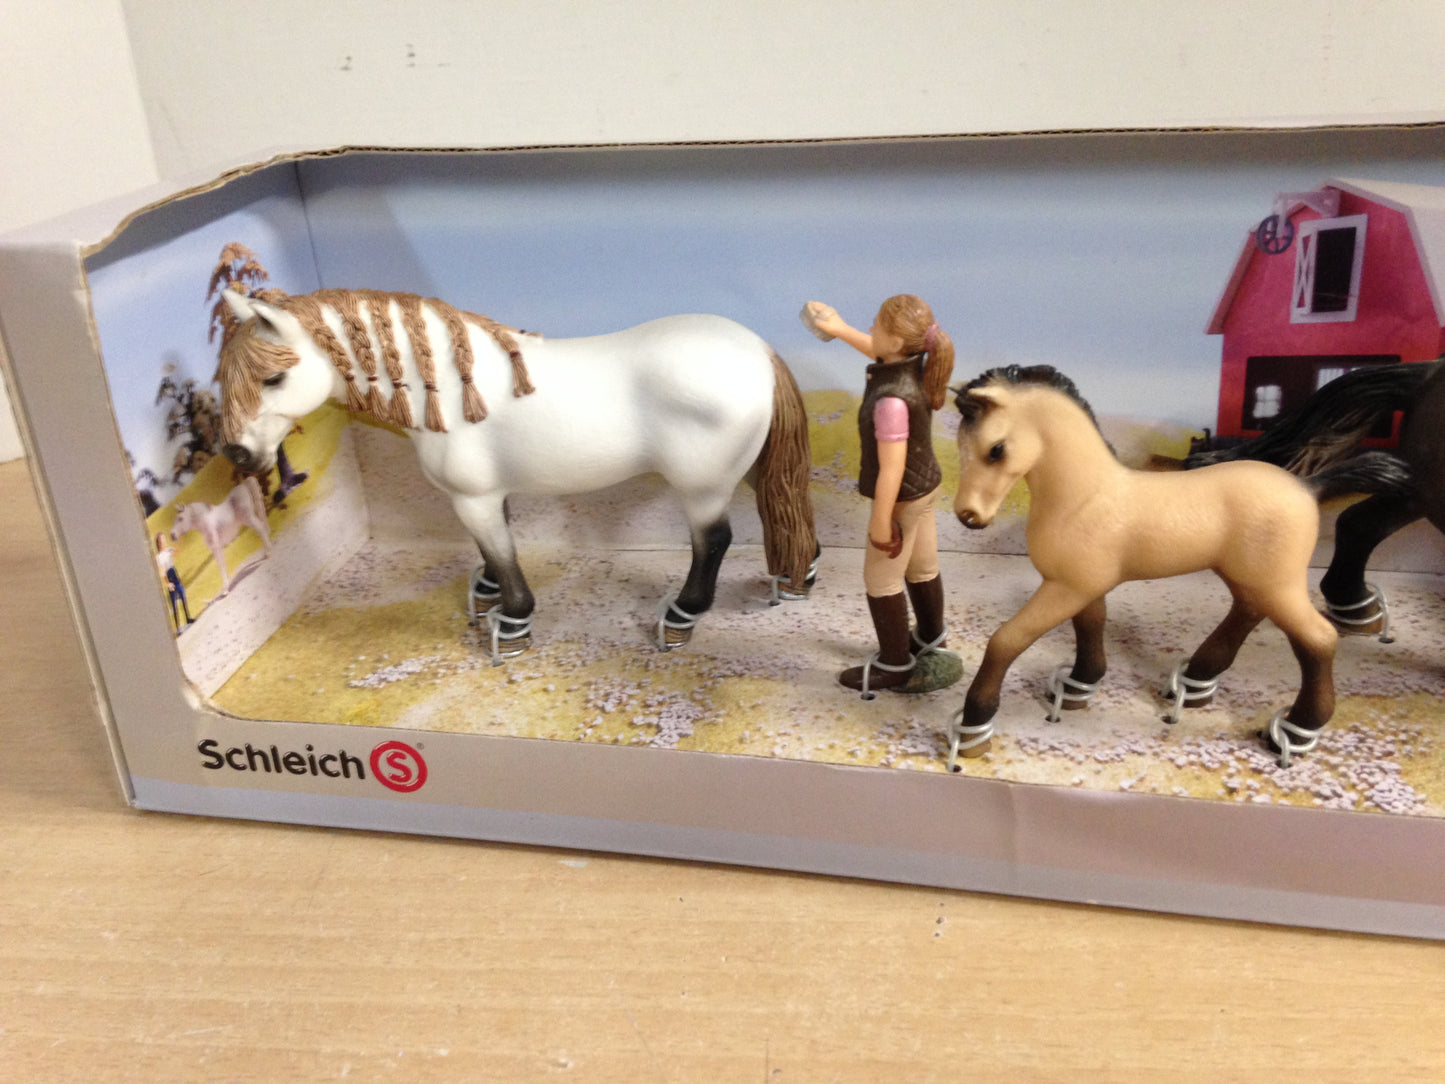 Horses Riding Schleich Germany Horses and Girl New In Box